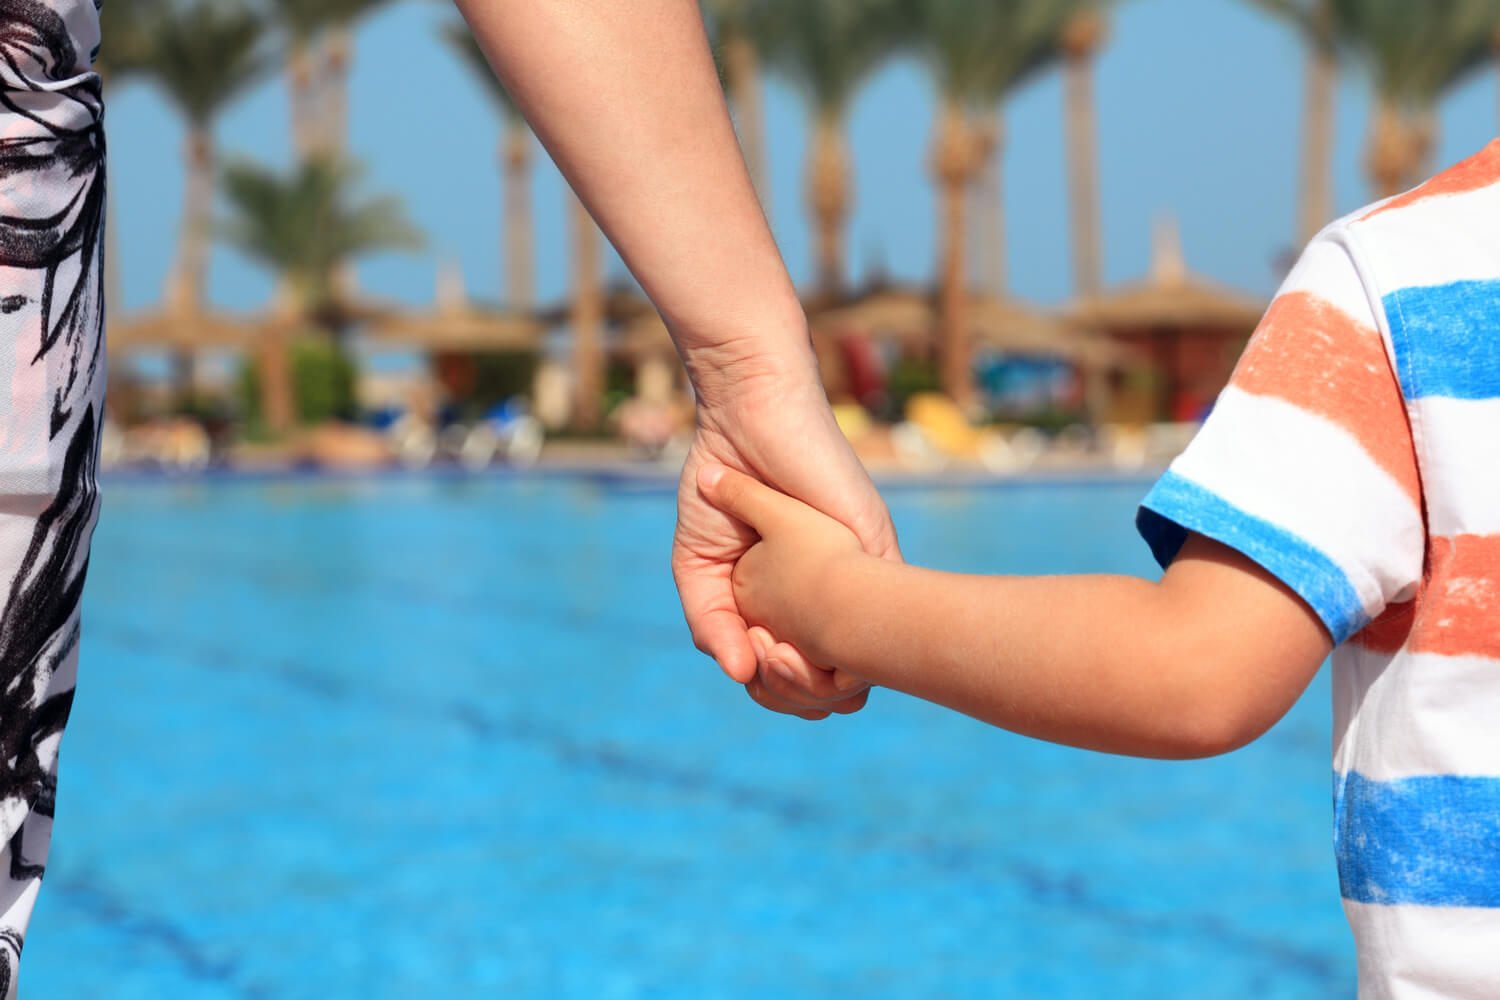 What Precautions Should I Take When My Child Goes to Swim_